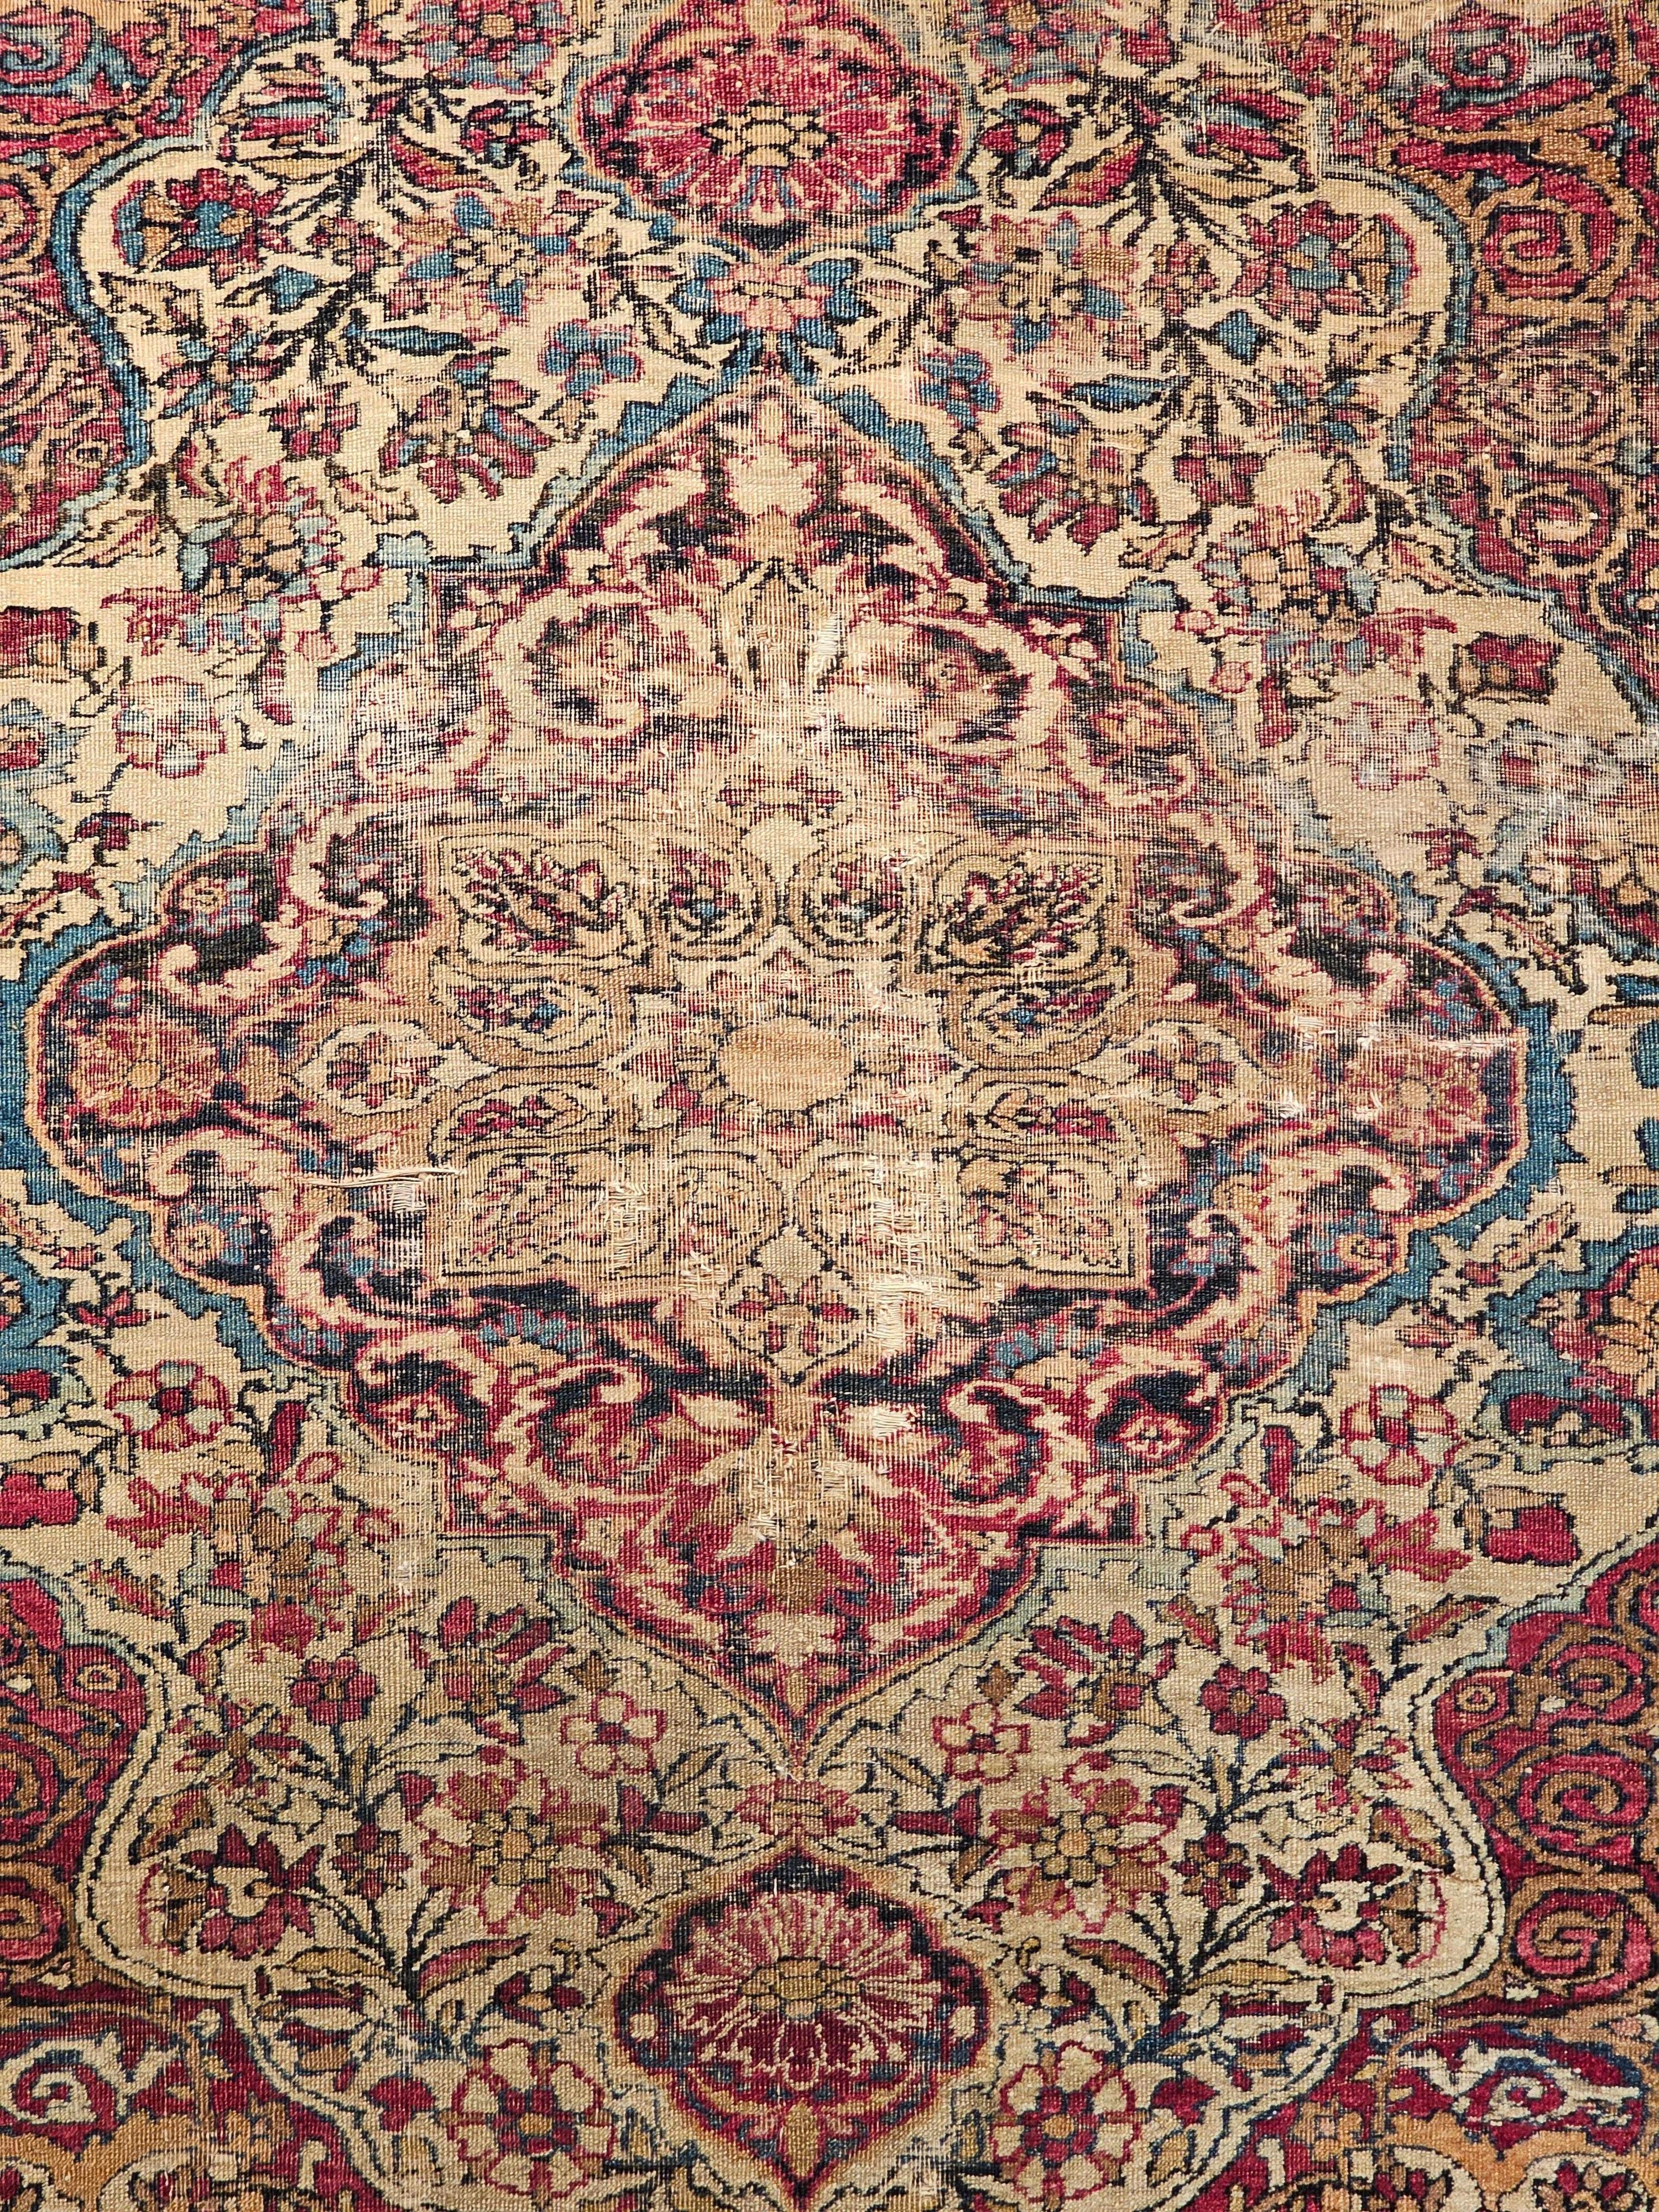 19th-Century Persian Kerman Lavar Area Rug in Floral Design in Ivory, Red, Blue In Good Condition For Sale In Barrington, IL